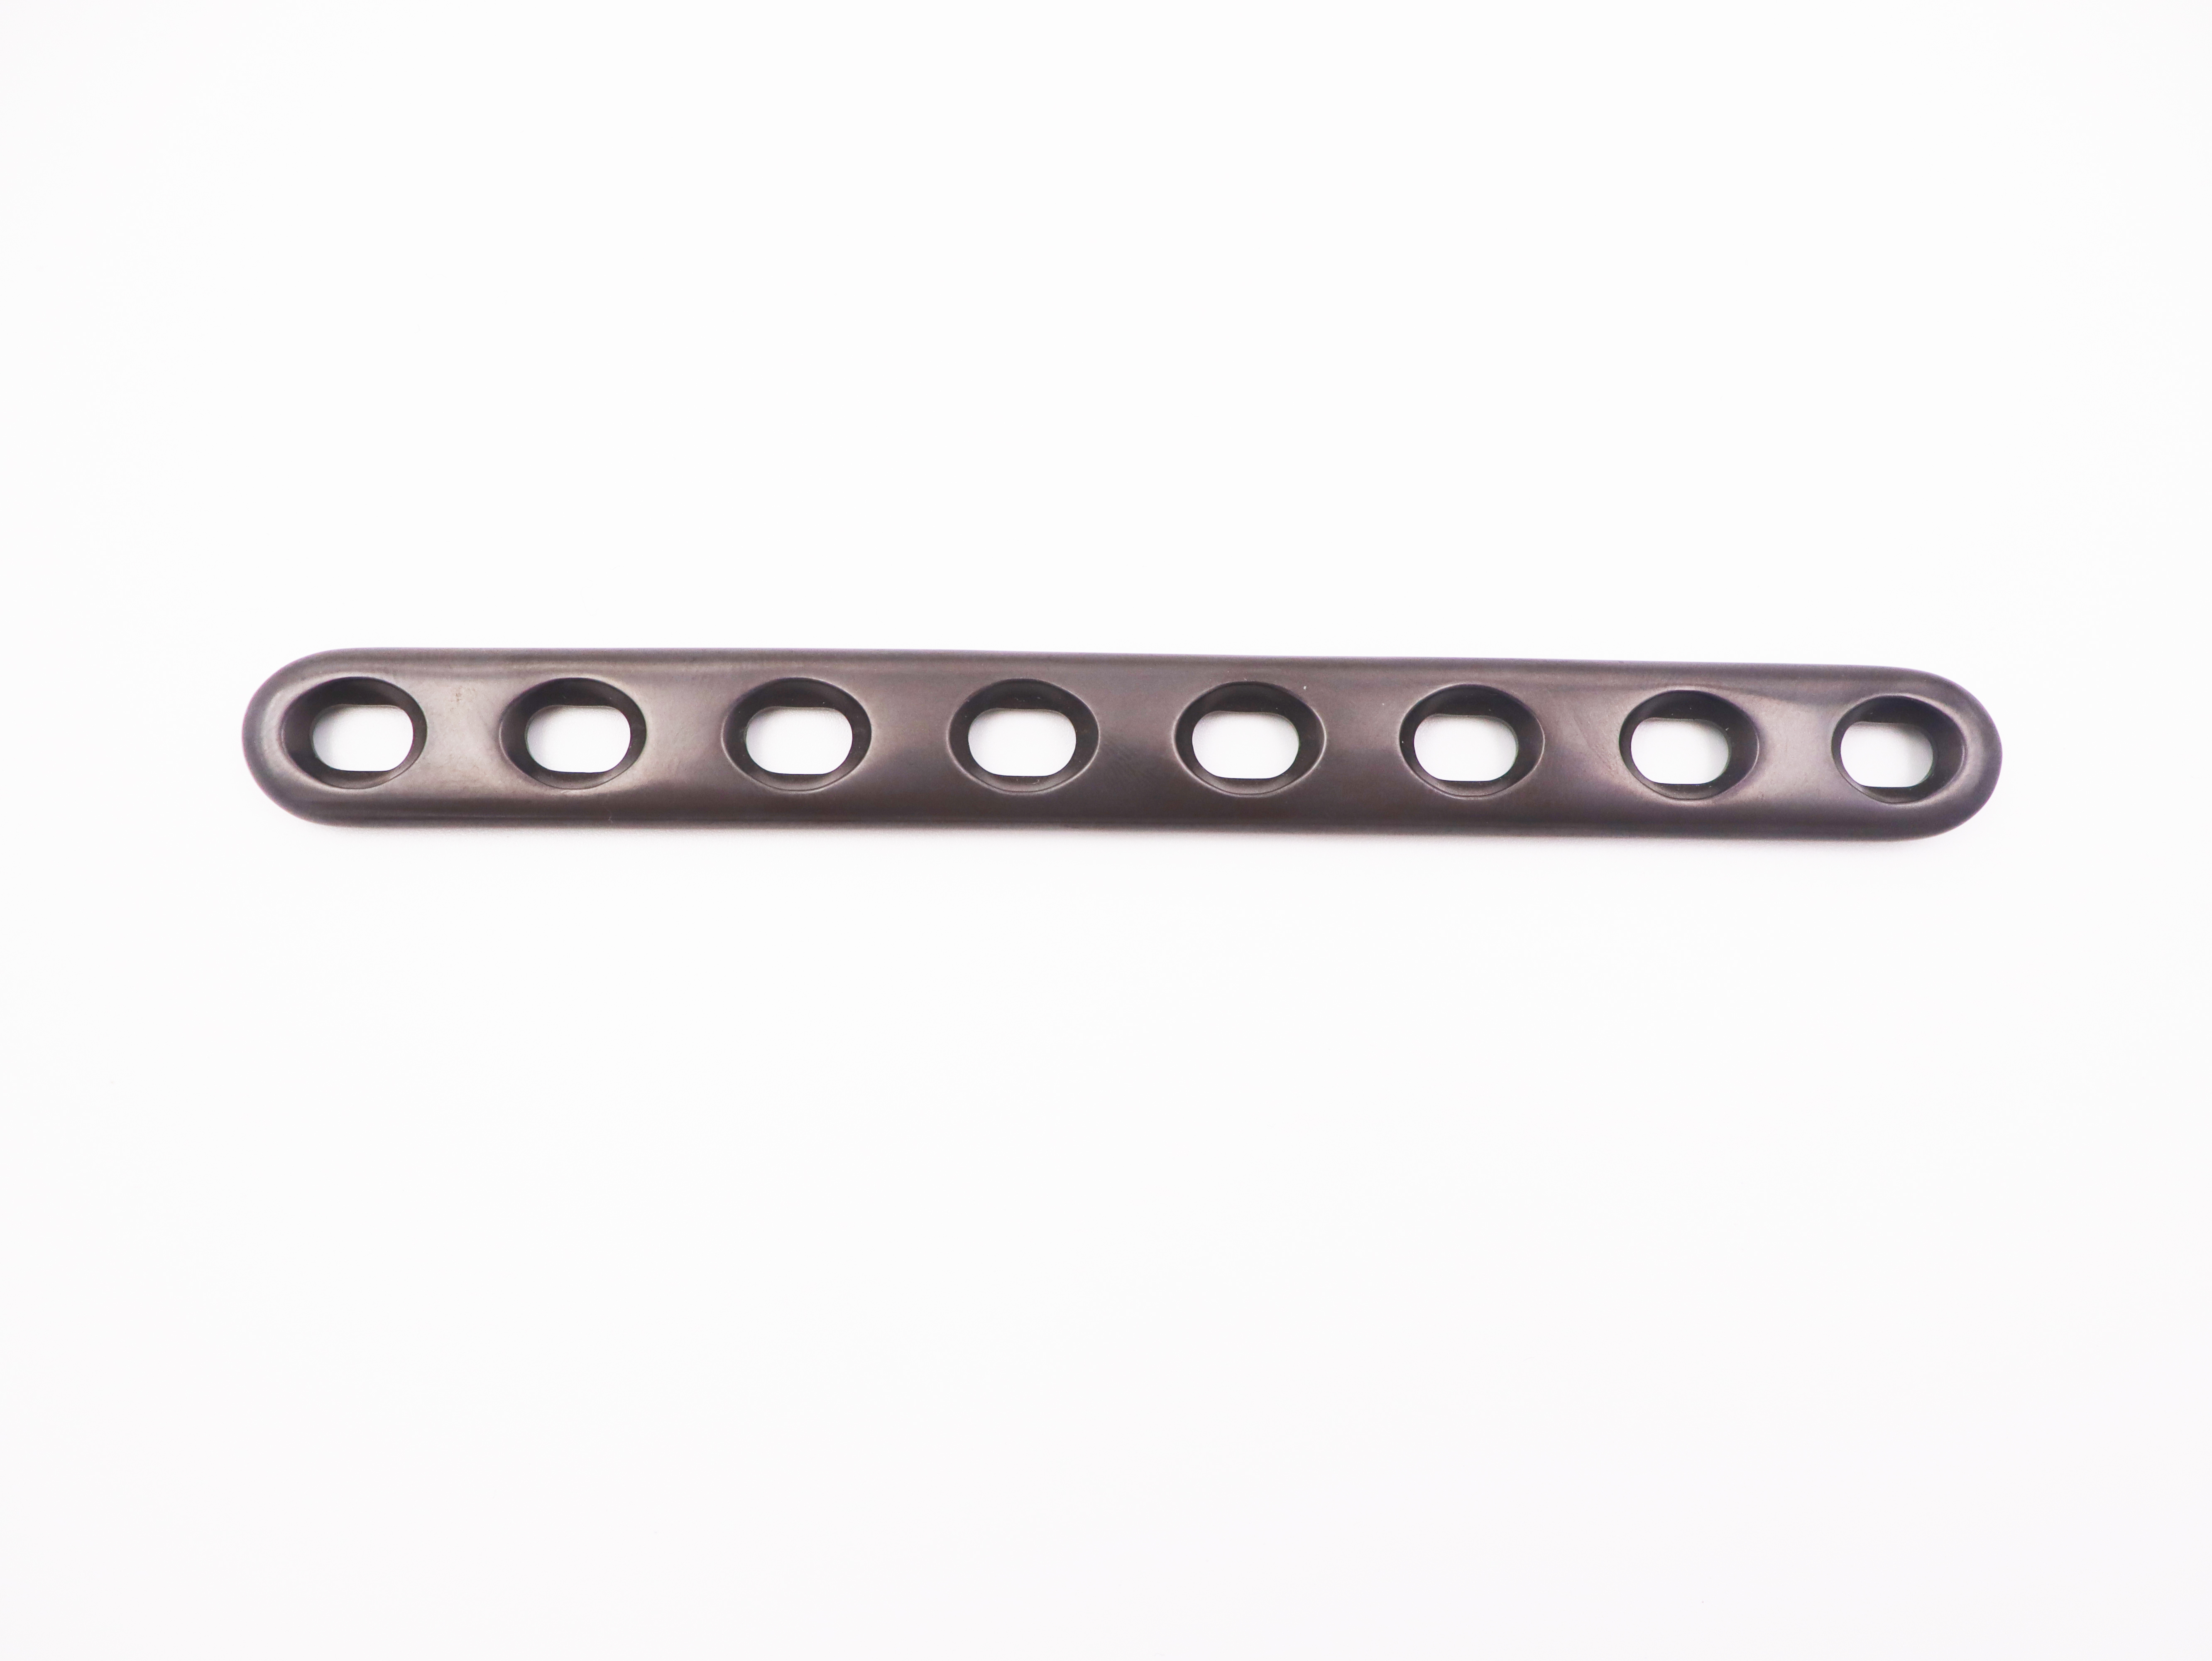 JINLU Medical Chinese factory Orthopedic implants LC-DCP Femoral femur diaphysis fracture plate